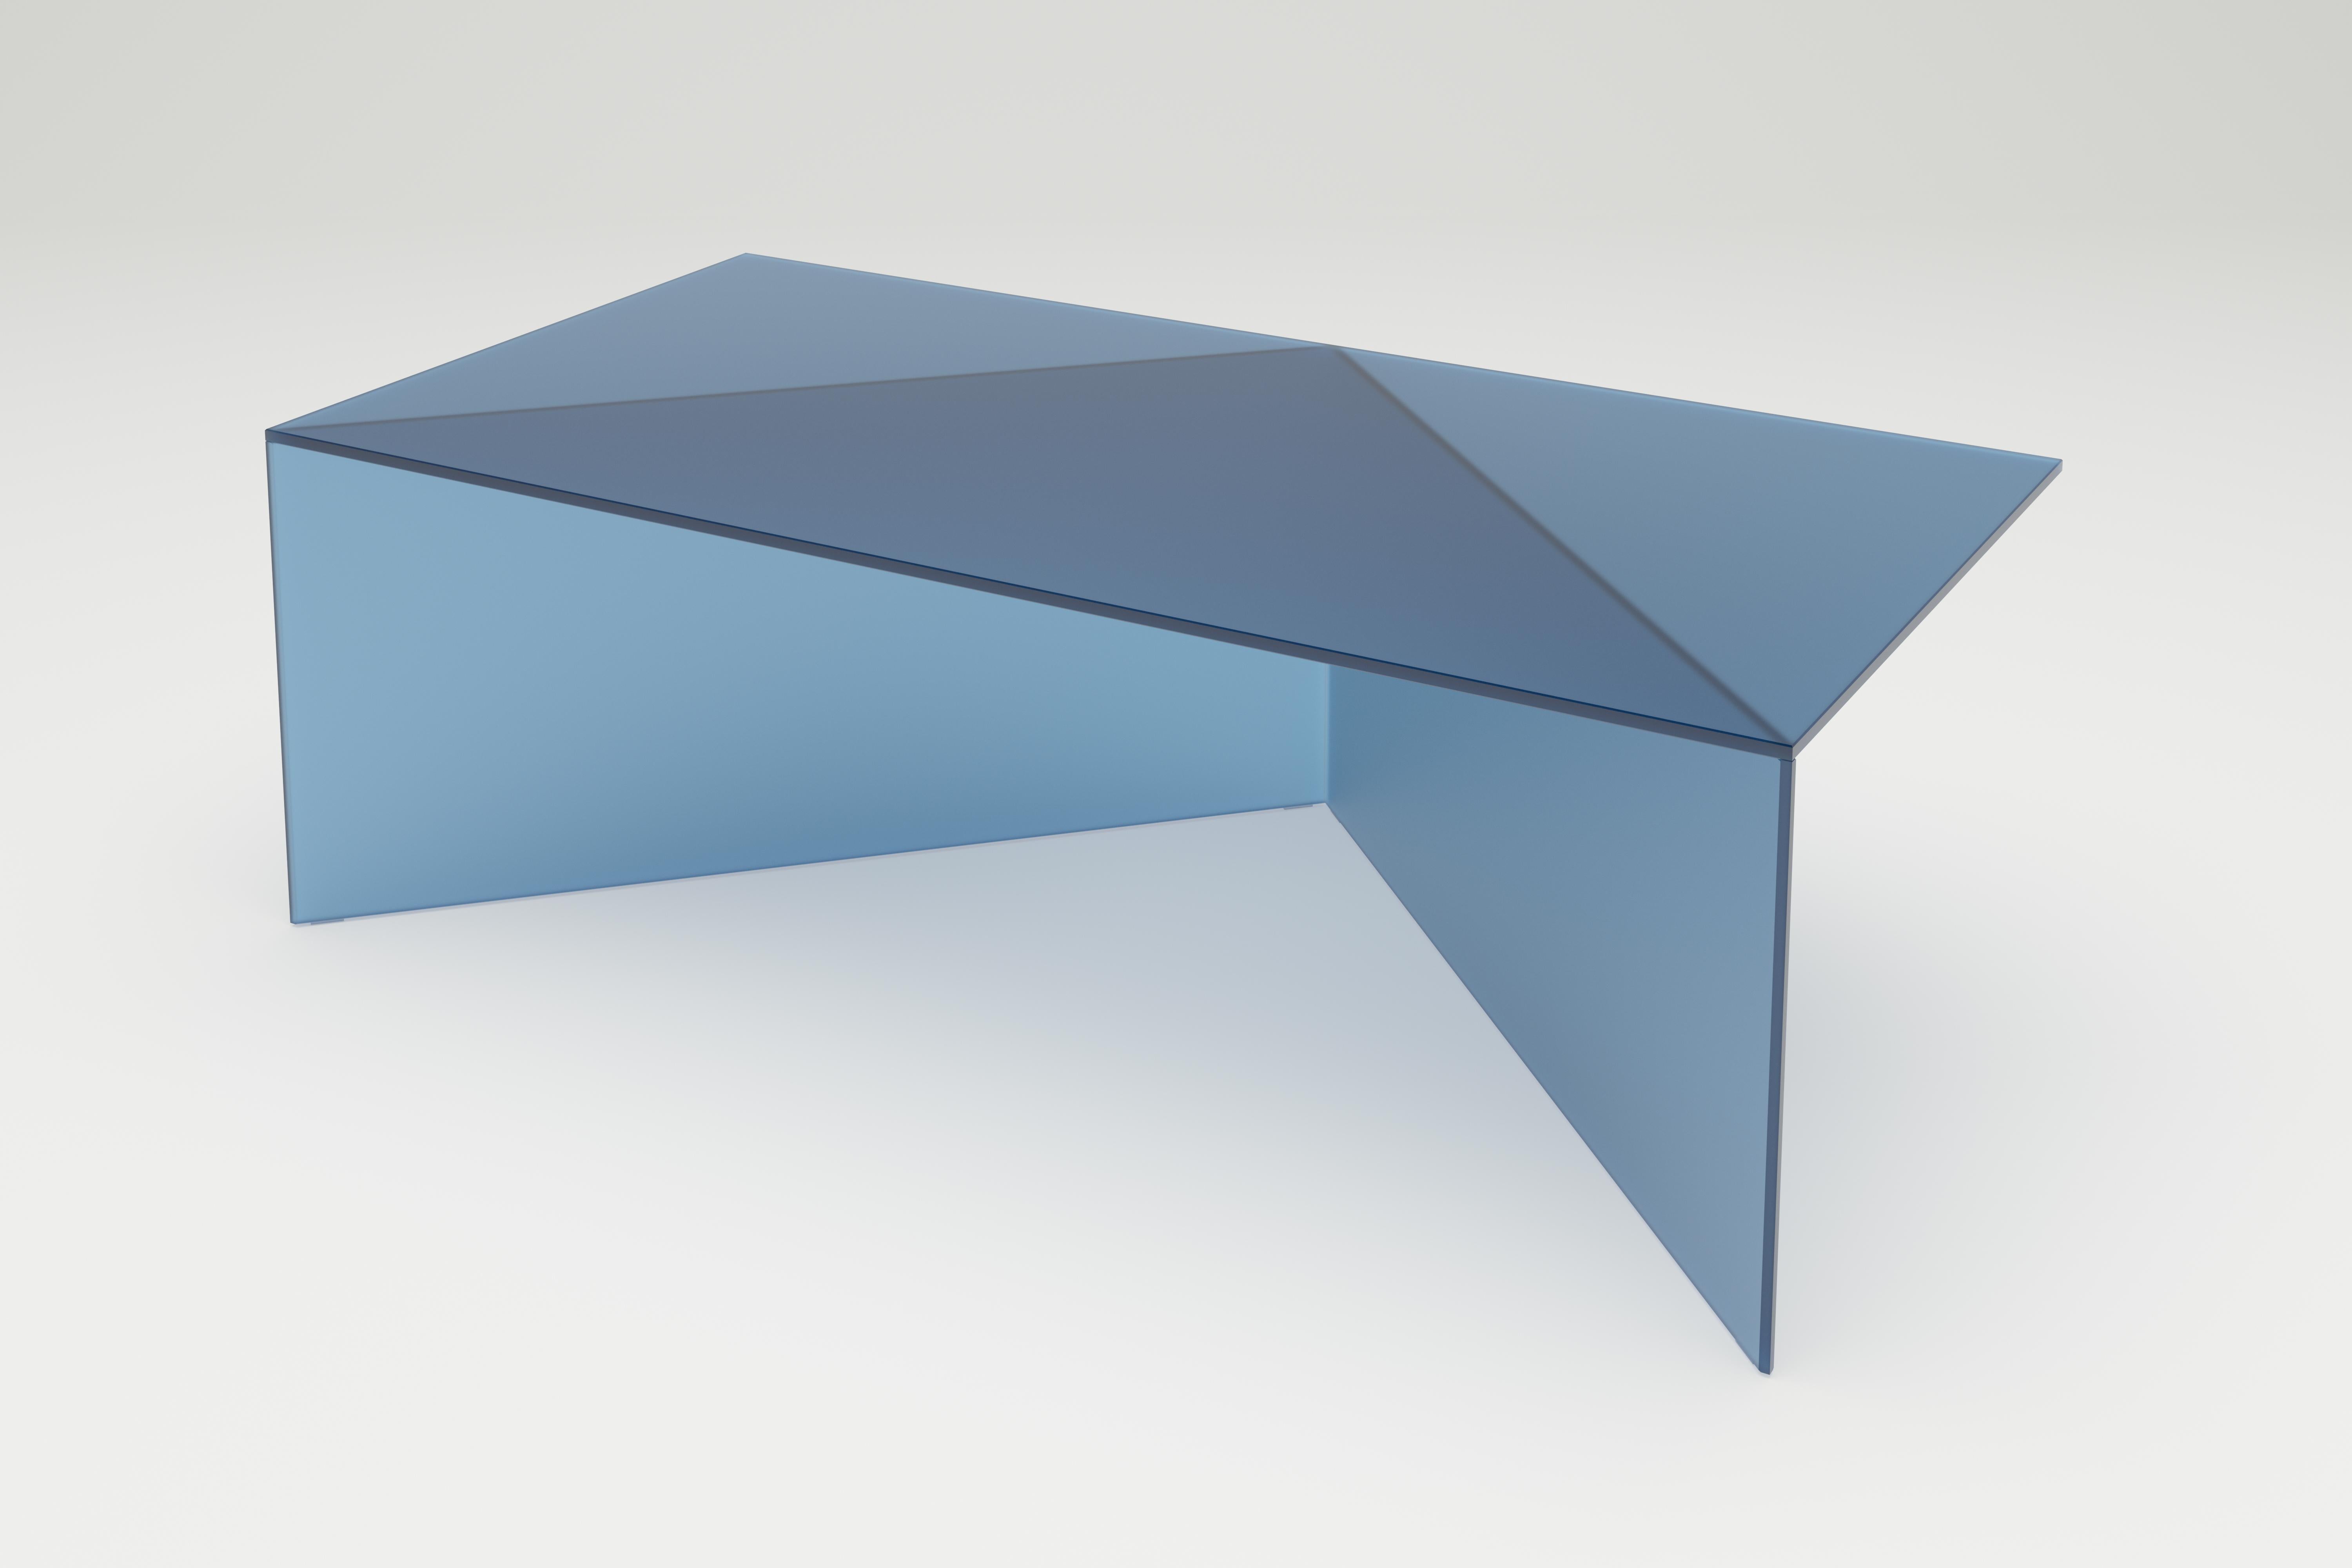 Blue satin glass poly oblong coffe table by Sebastian Scherer
Dimensions: D120 x W30 x H40 cm
Materials: Solid coloured glass.
Weight: 34.4 kg.
Also available: Colours:clear white (transparent) / clear green / clear blue / clear bronze / clear